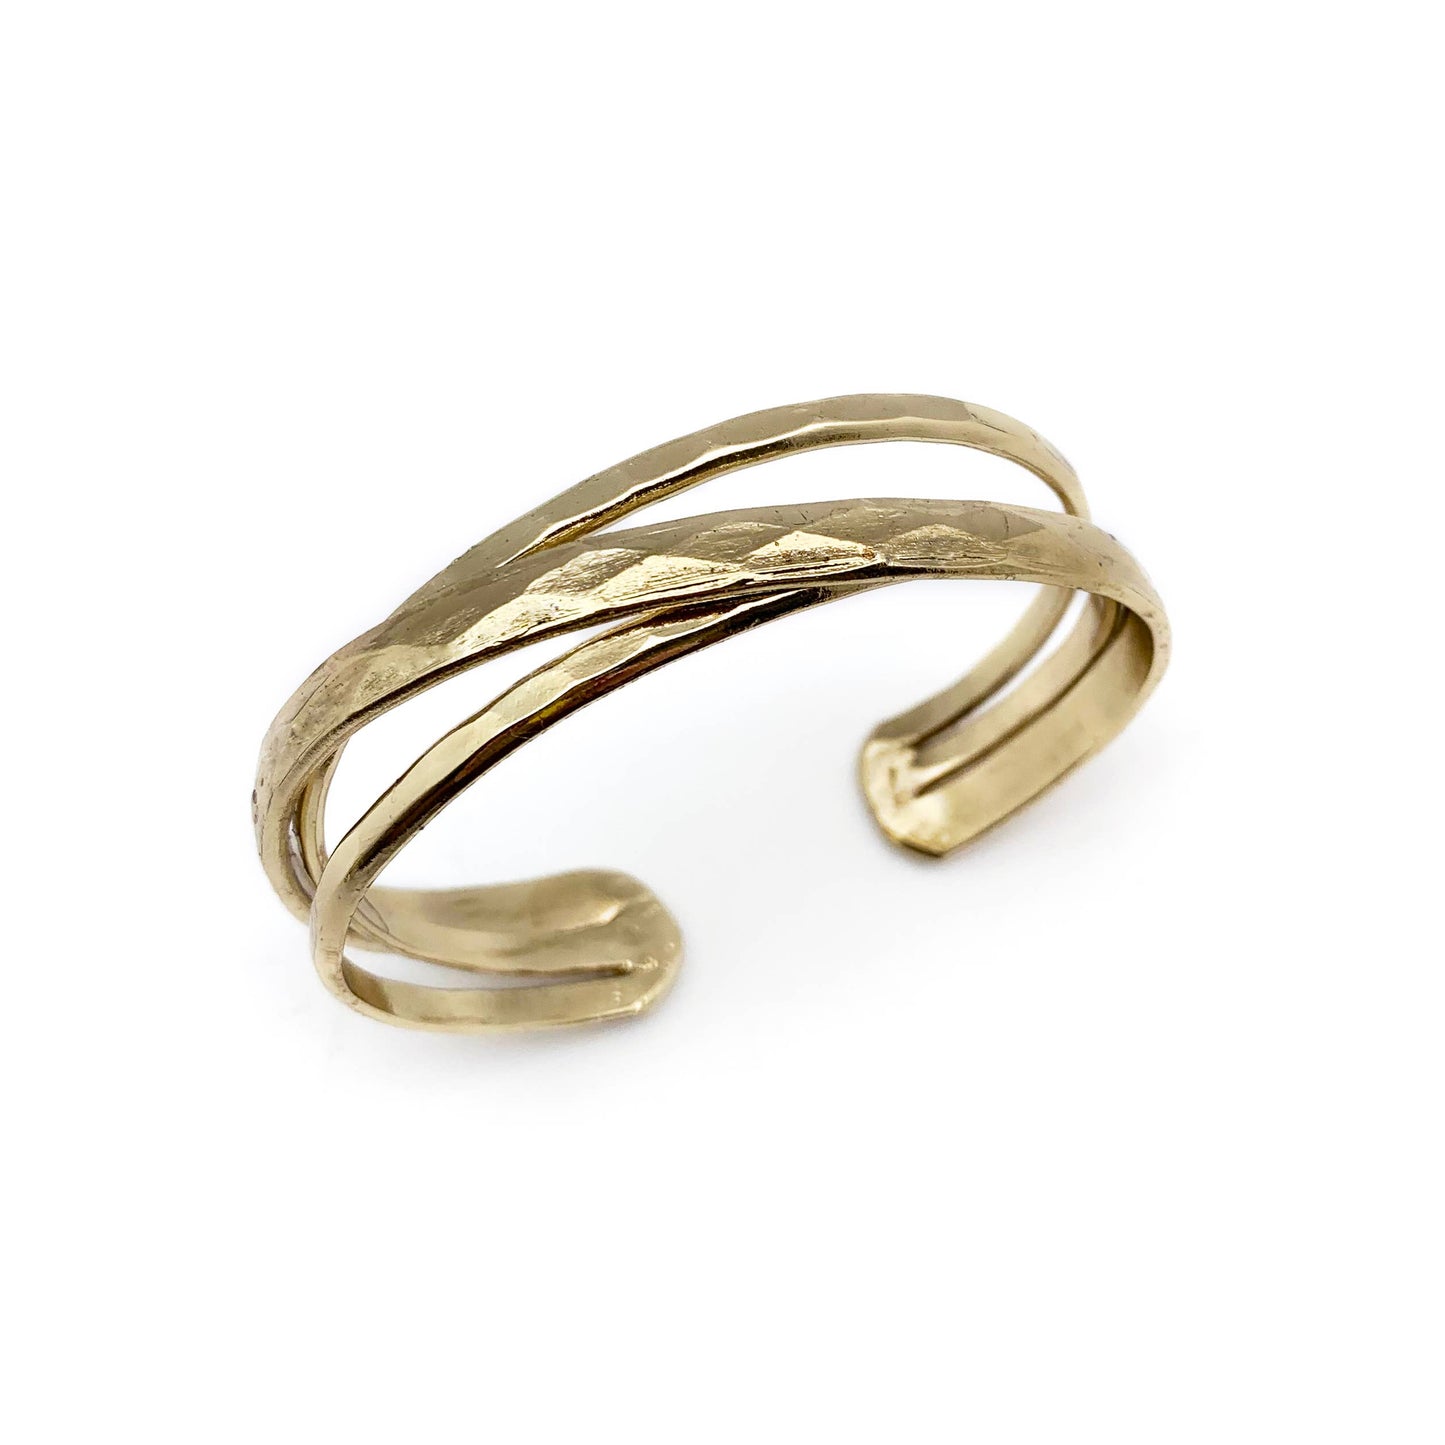 Gold Plated Adjustable Cuff Bracelet - Stacked Thin Bands